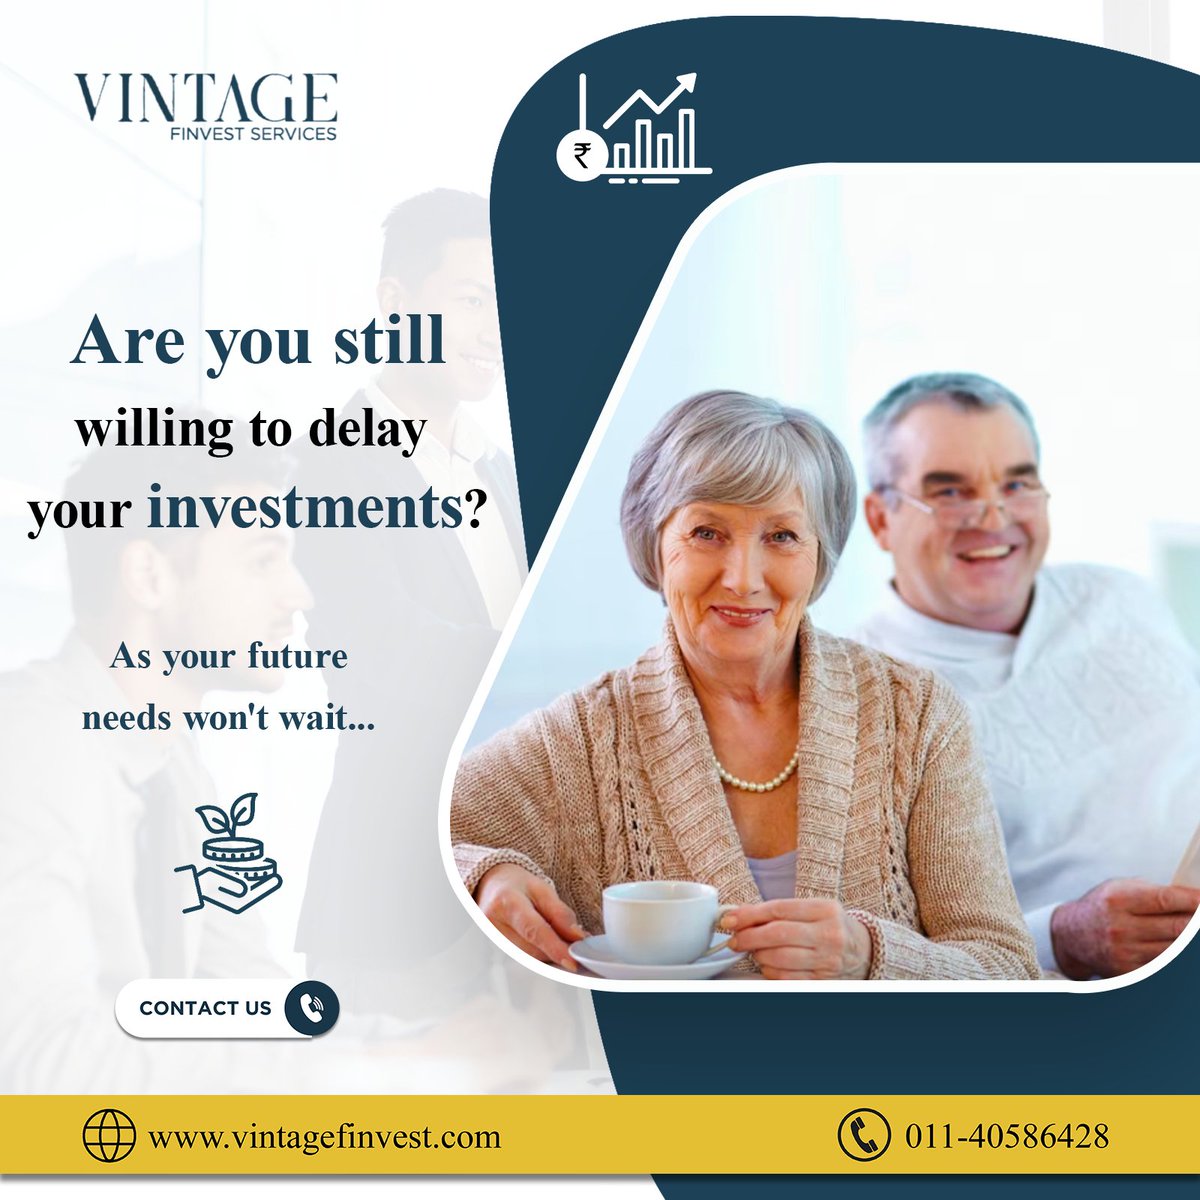 Don't let your needs wait any longer! Take control of your financial future and start investing today

#vintagefinvest #investment #finanacialfuture #Futureplaning #startinvesting #takecontrol #waitlonger #secureyourfuture